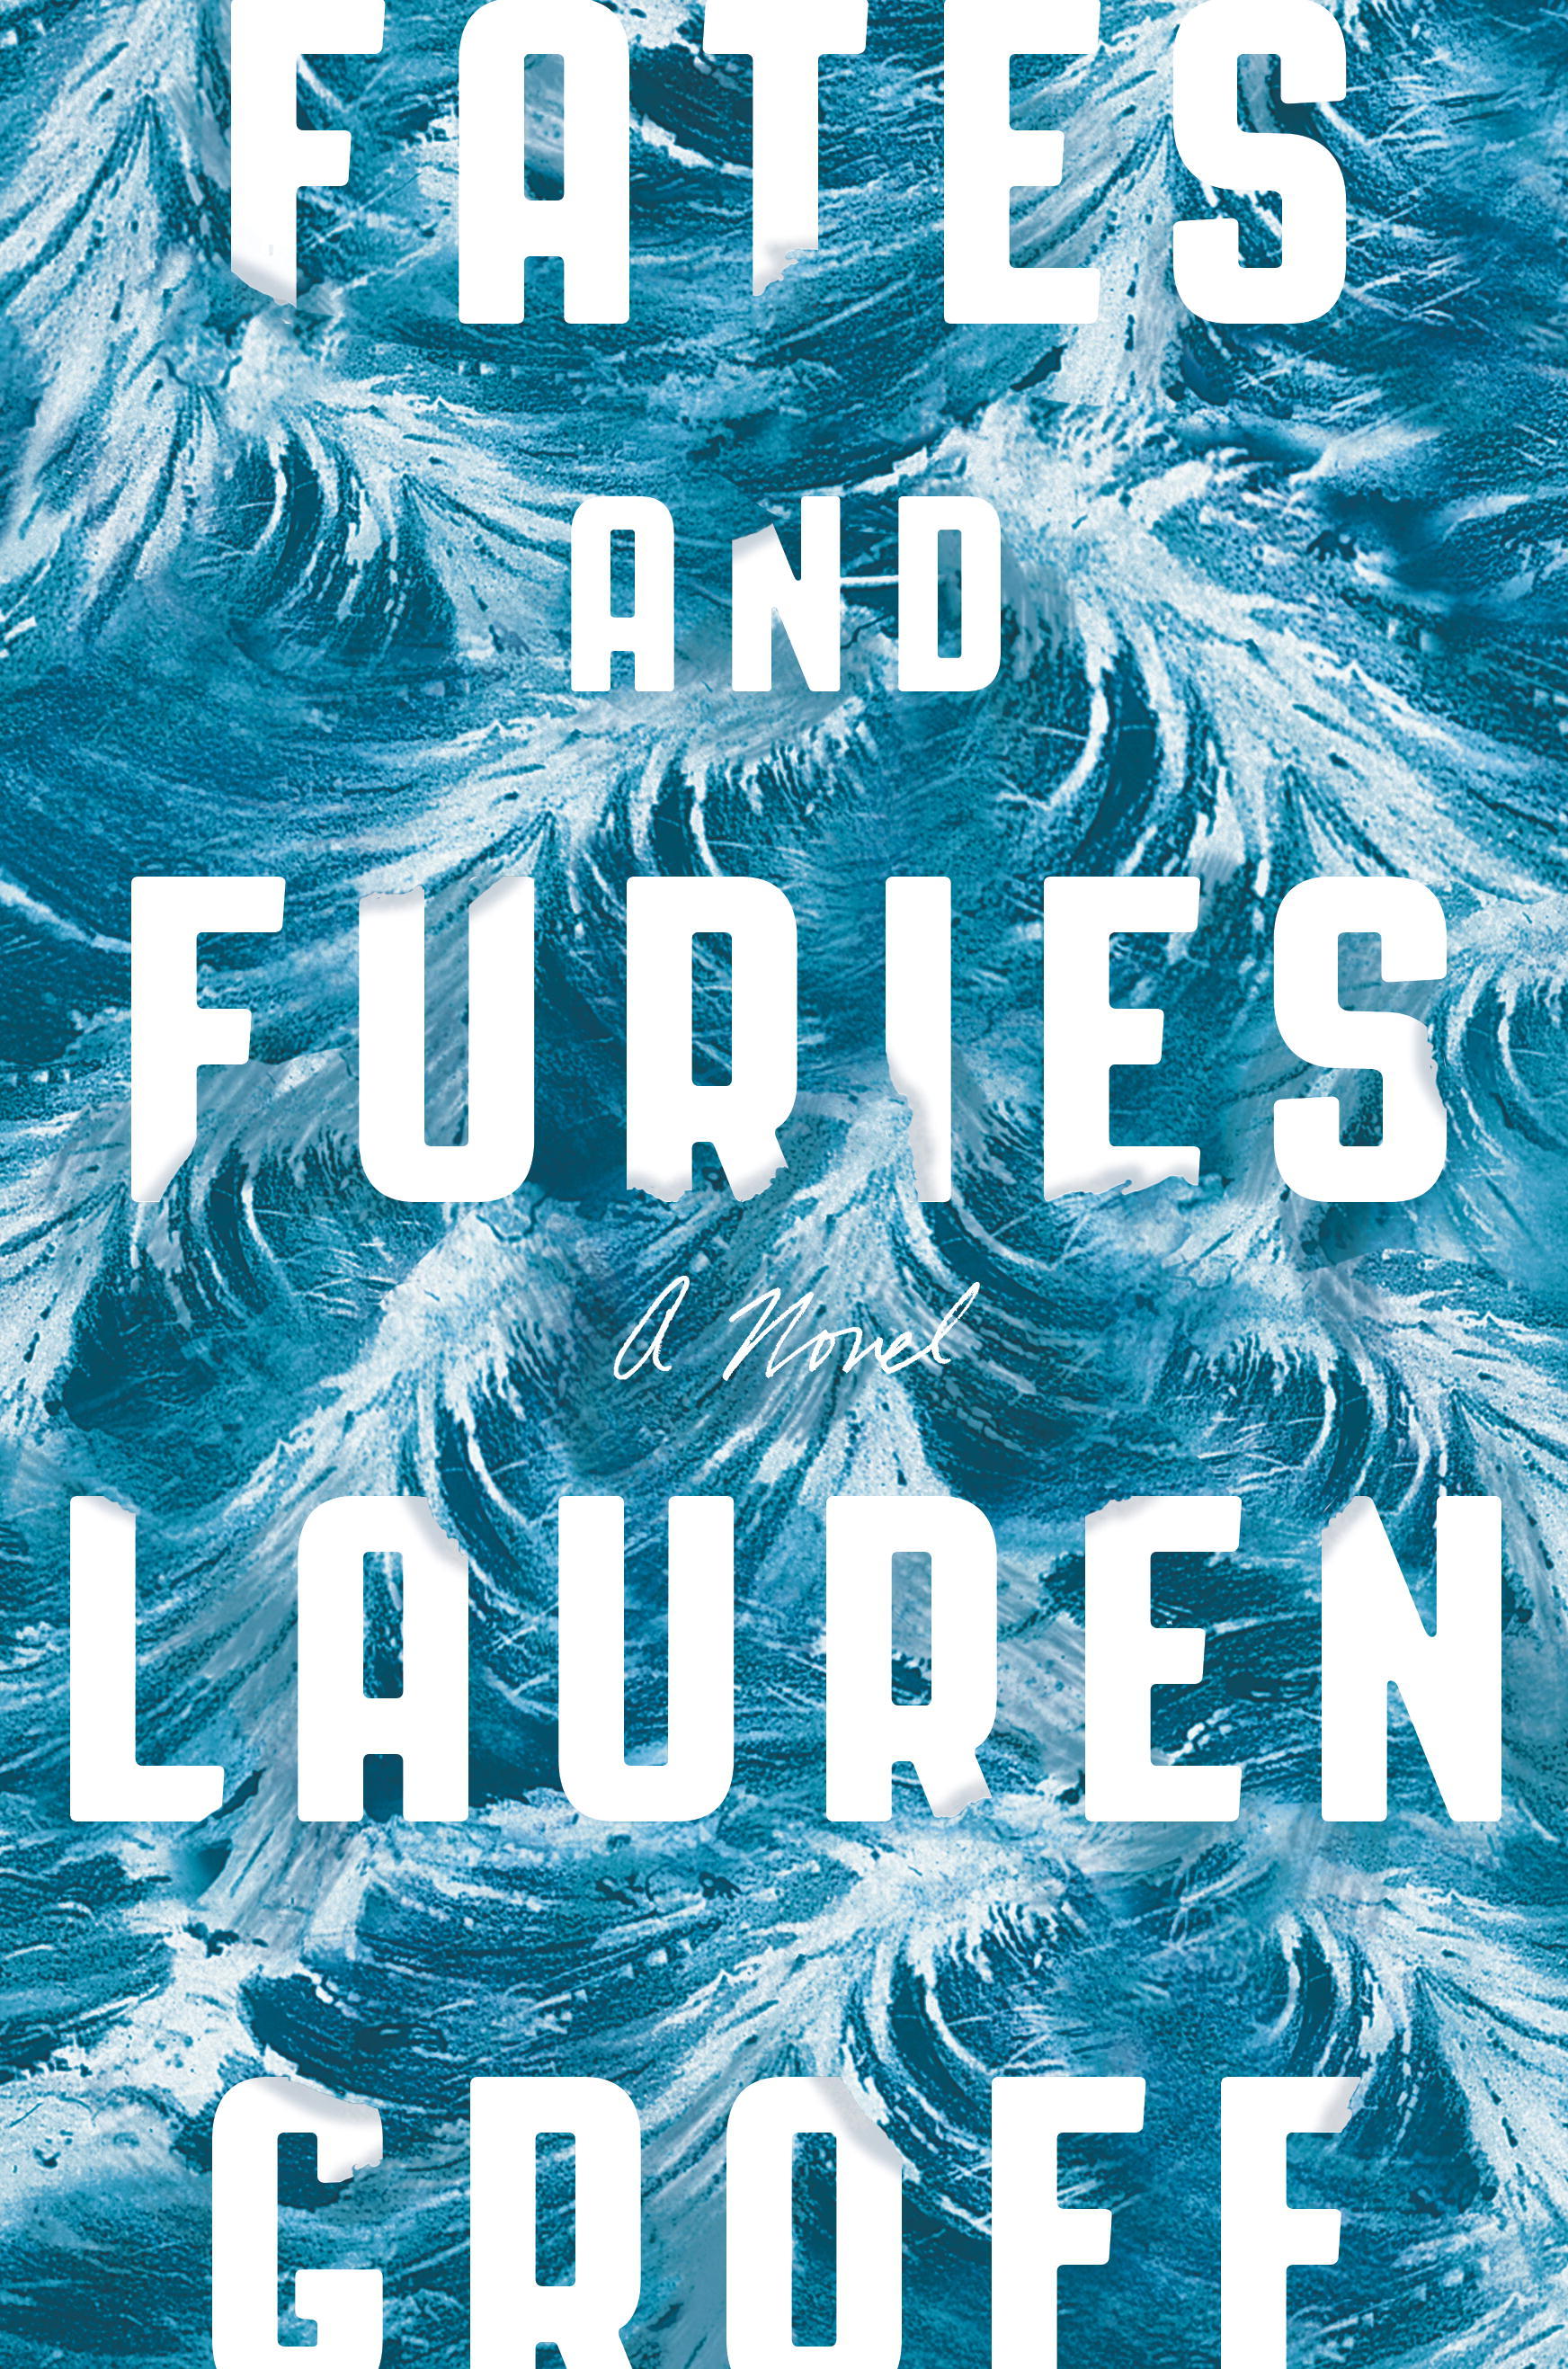 Fates and Furies Cover